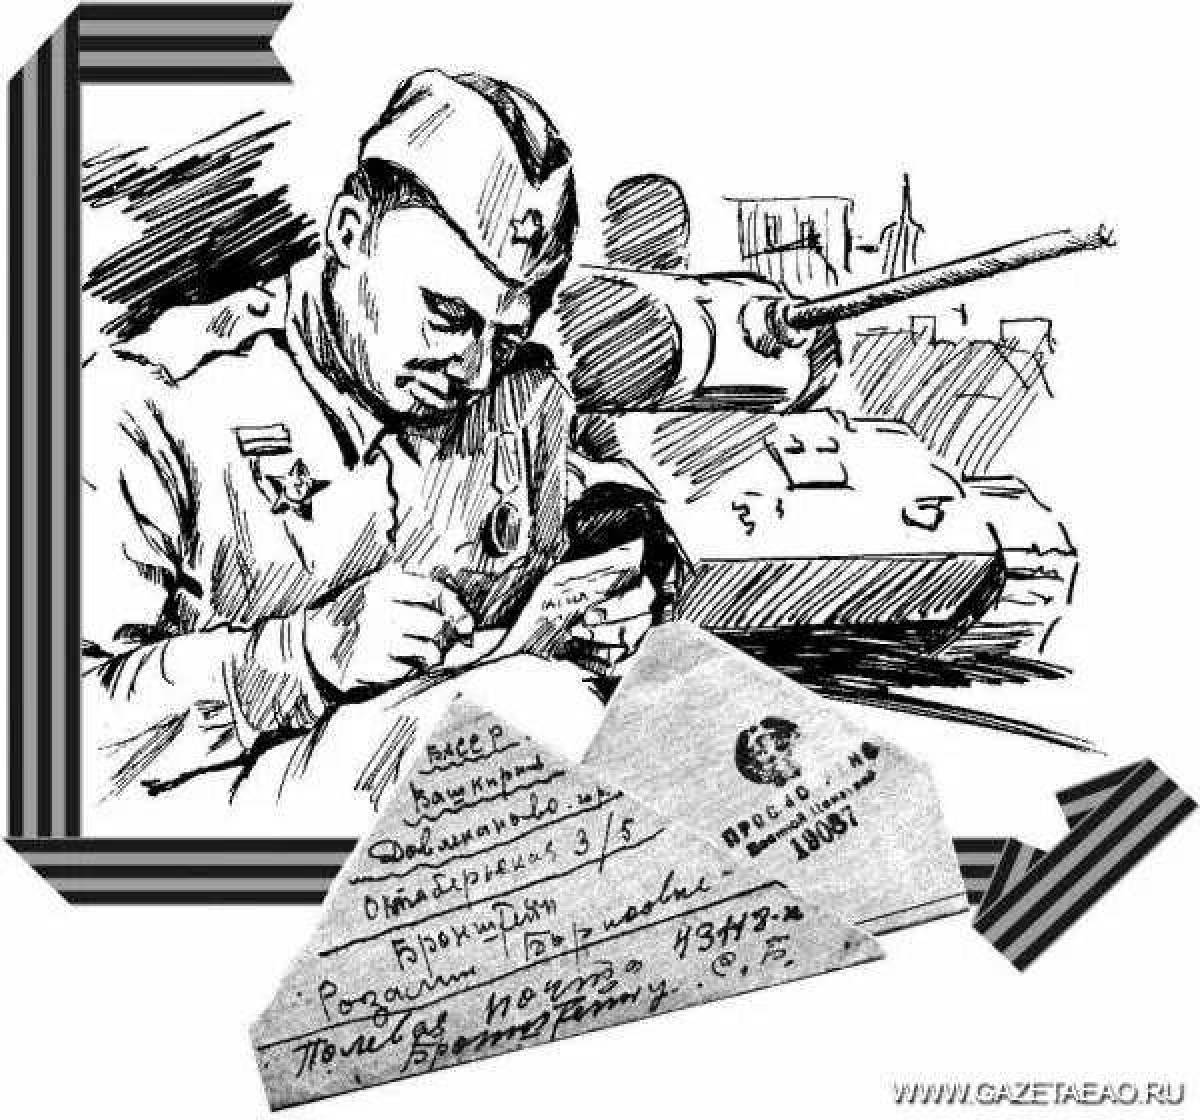 Fun letter to soldier drawing